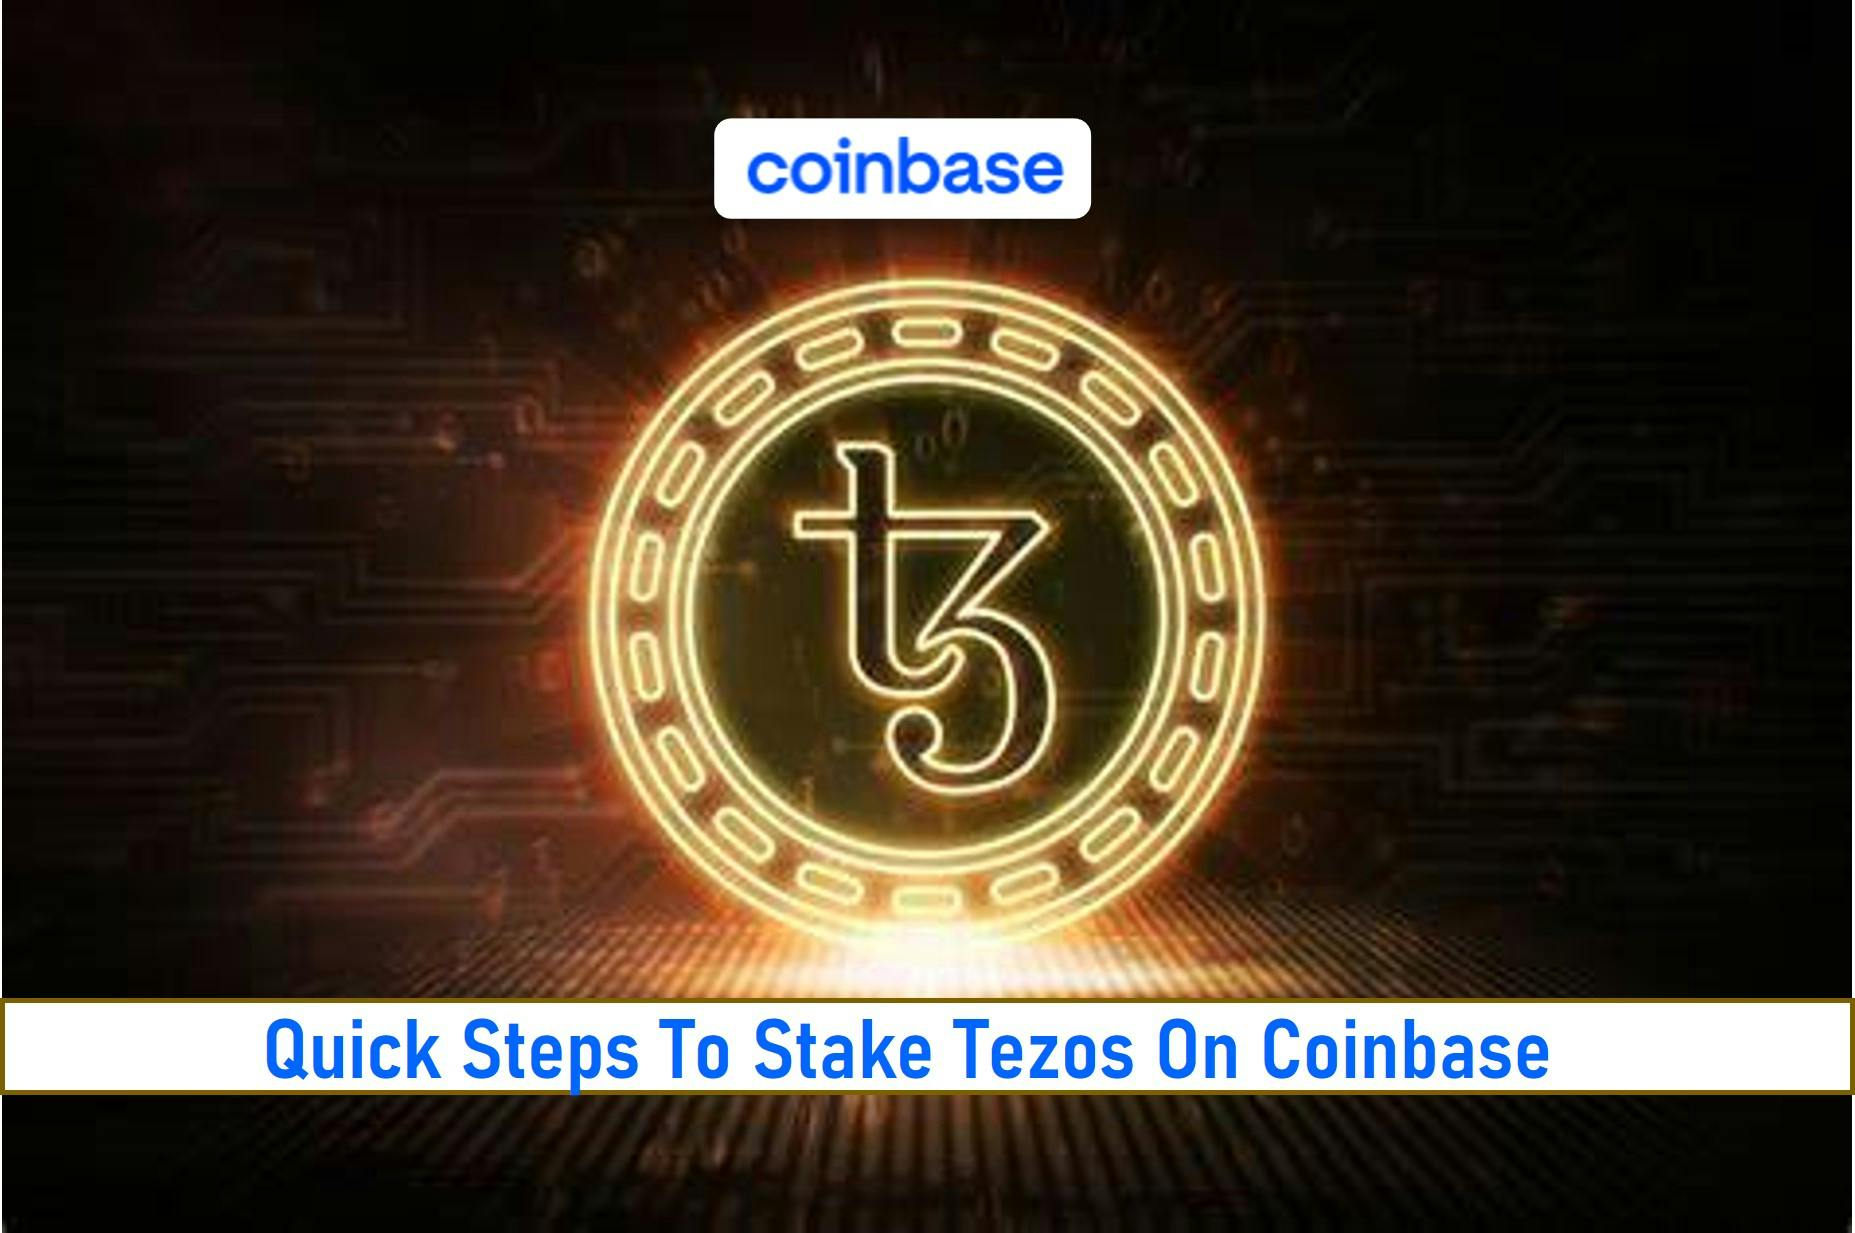 Quick Steps To Stake Tezos On Coinbase